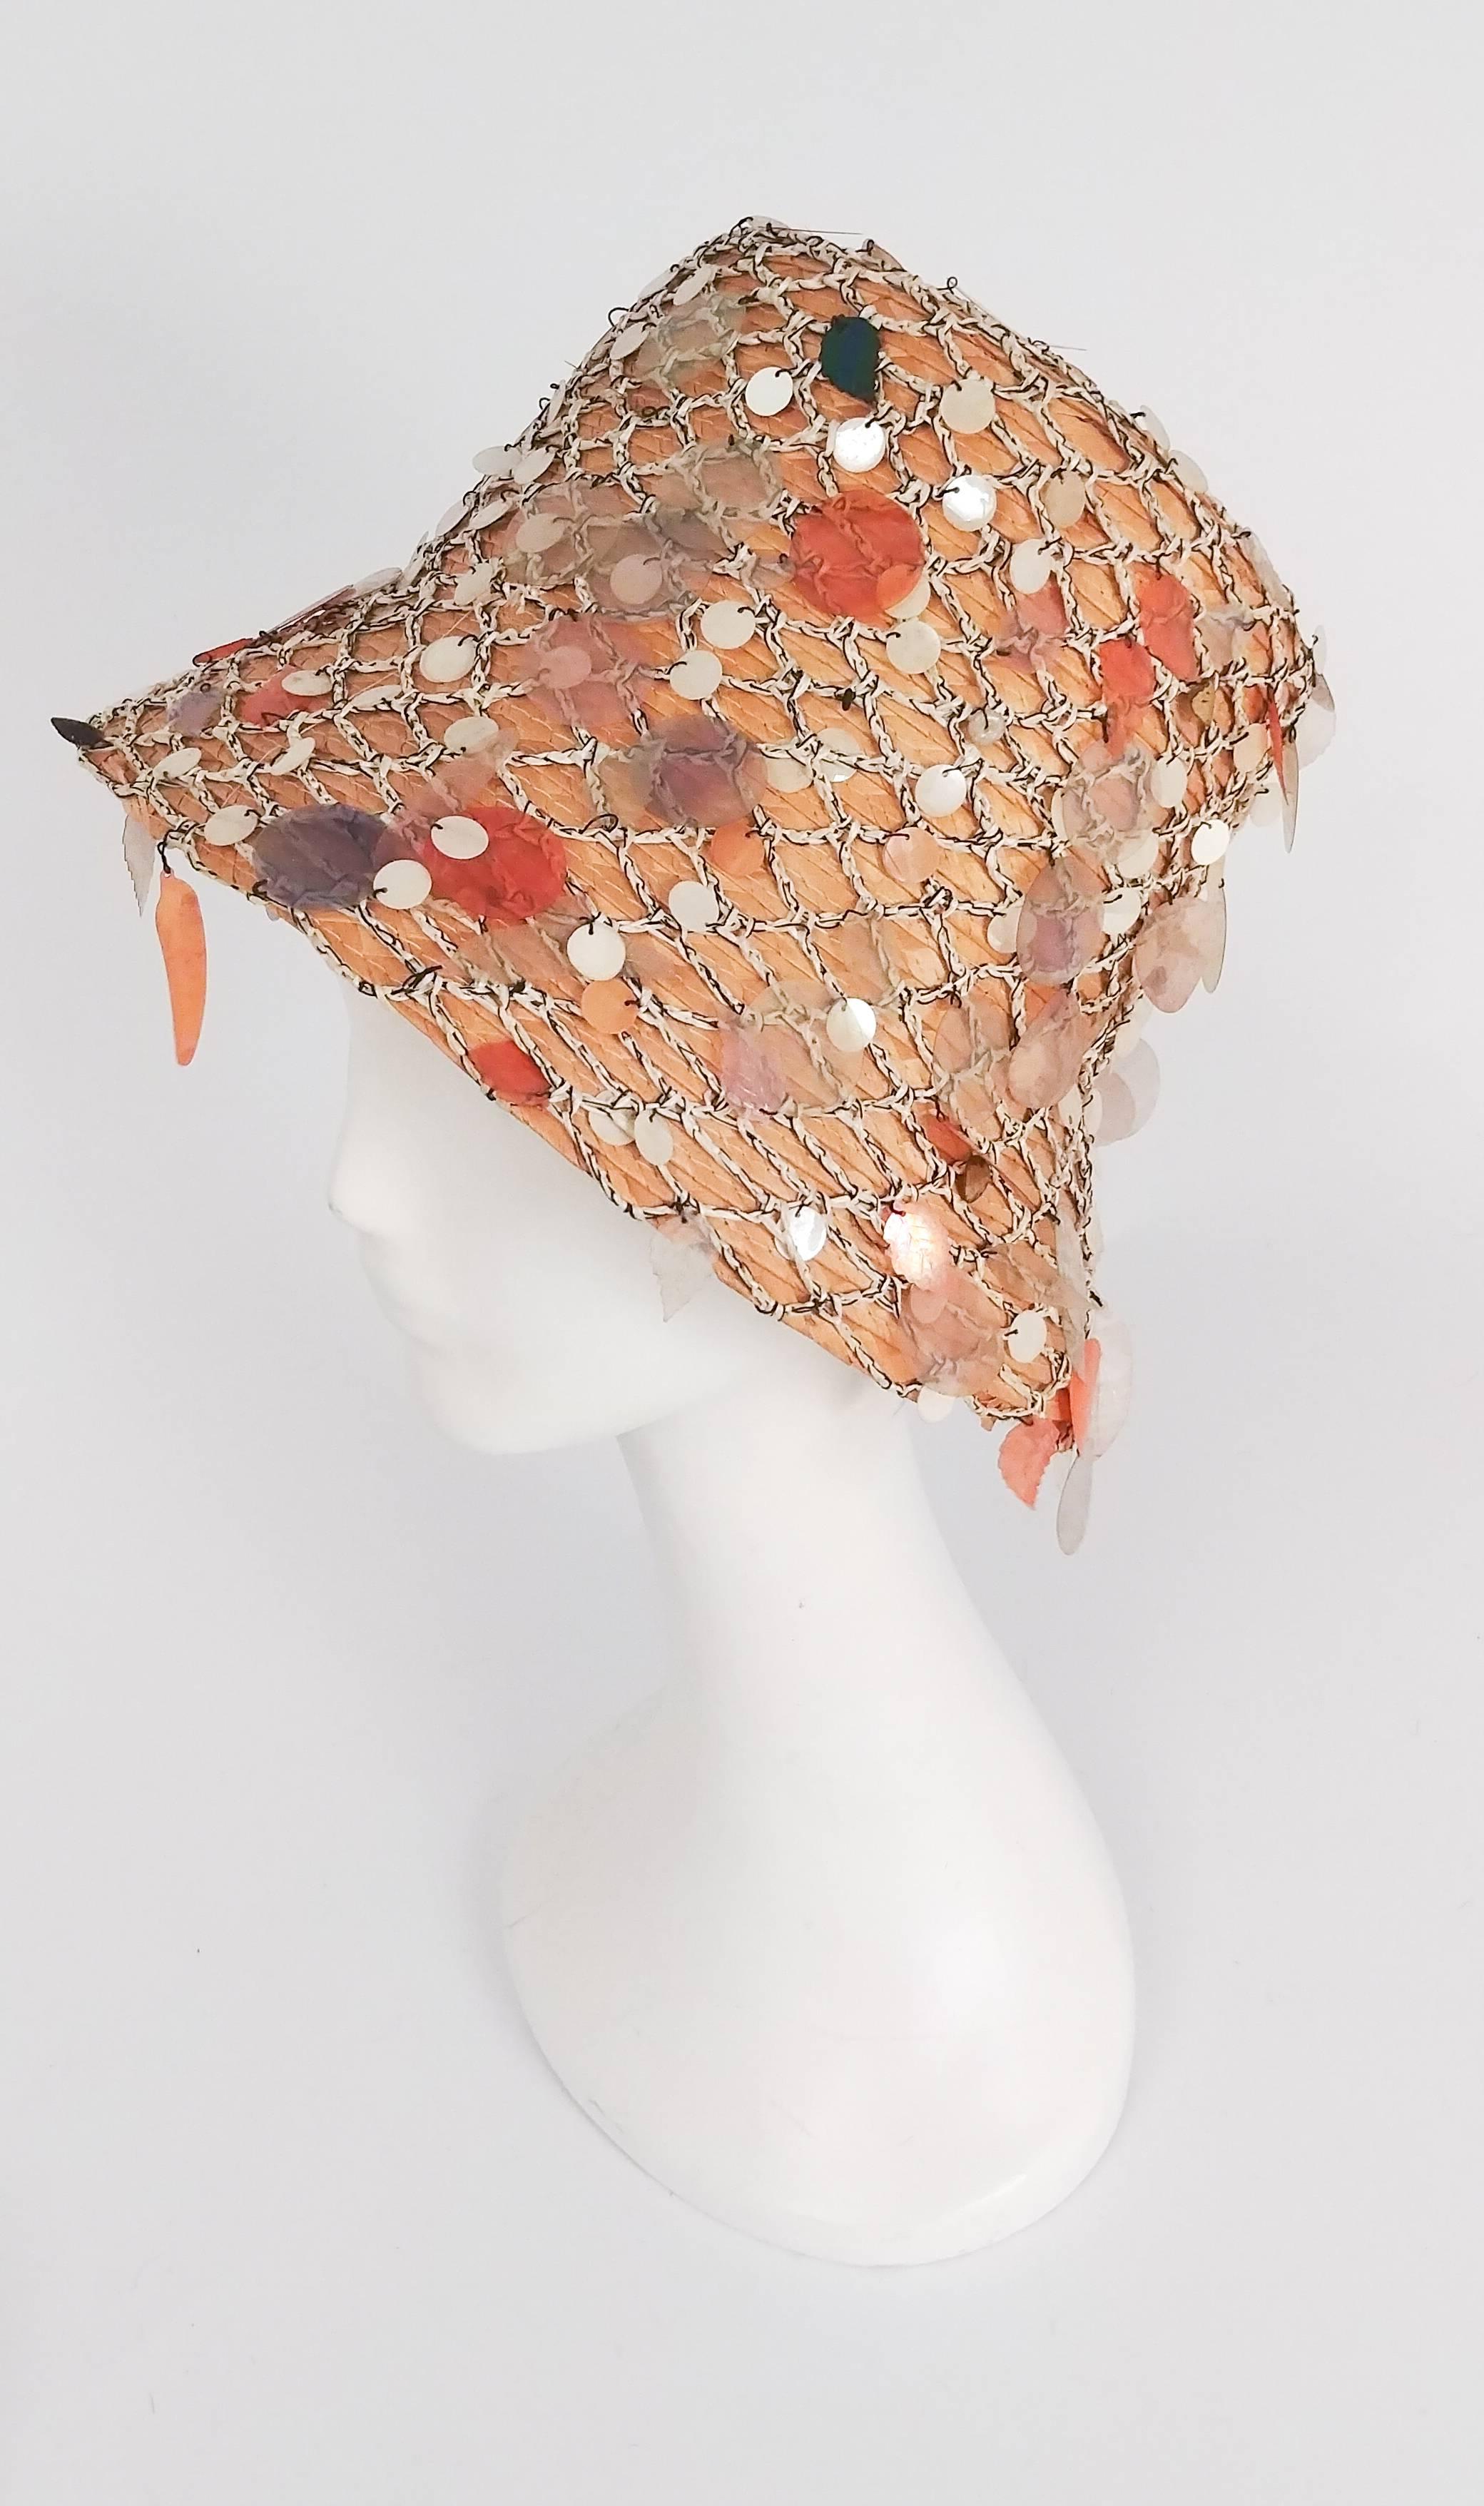 1960s Straw Summer Mermaid Cloche w/ Sequins. Fishnet outer covering. Made in Italy.